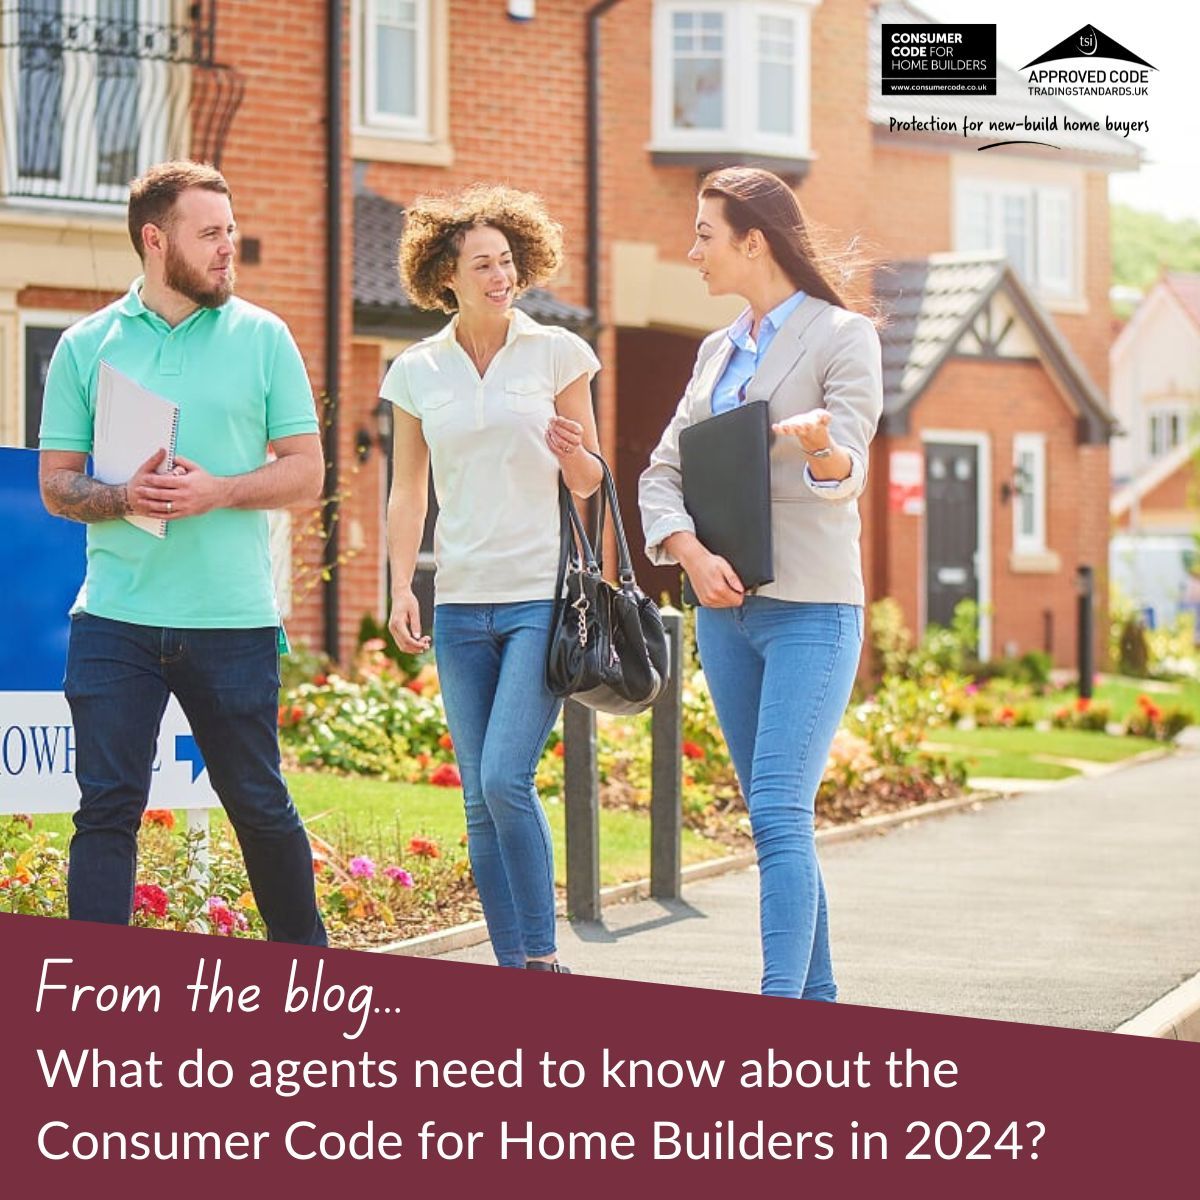 ❓ What do agents need to know about the Consumer Code for Home Builders in 2024? If you're an agent selling homes on behalf of a builder covered by our Code, you and your client will need to comply with the relevant requirements 👇 buff.ly/3TG9p1H @propertymarkuk